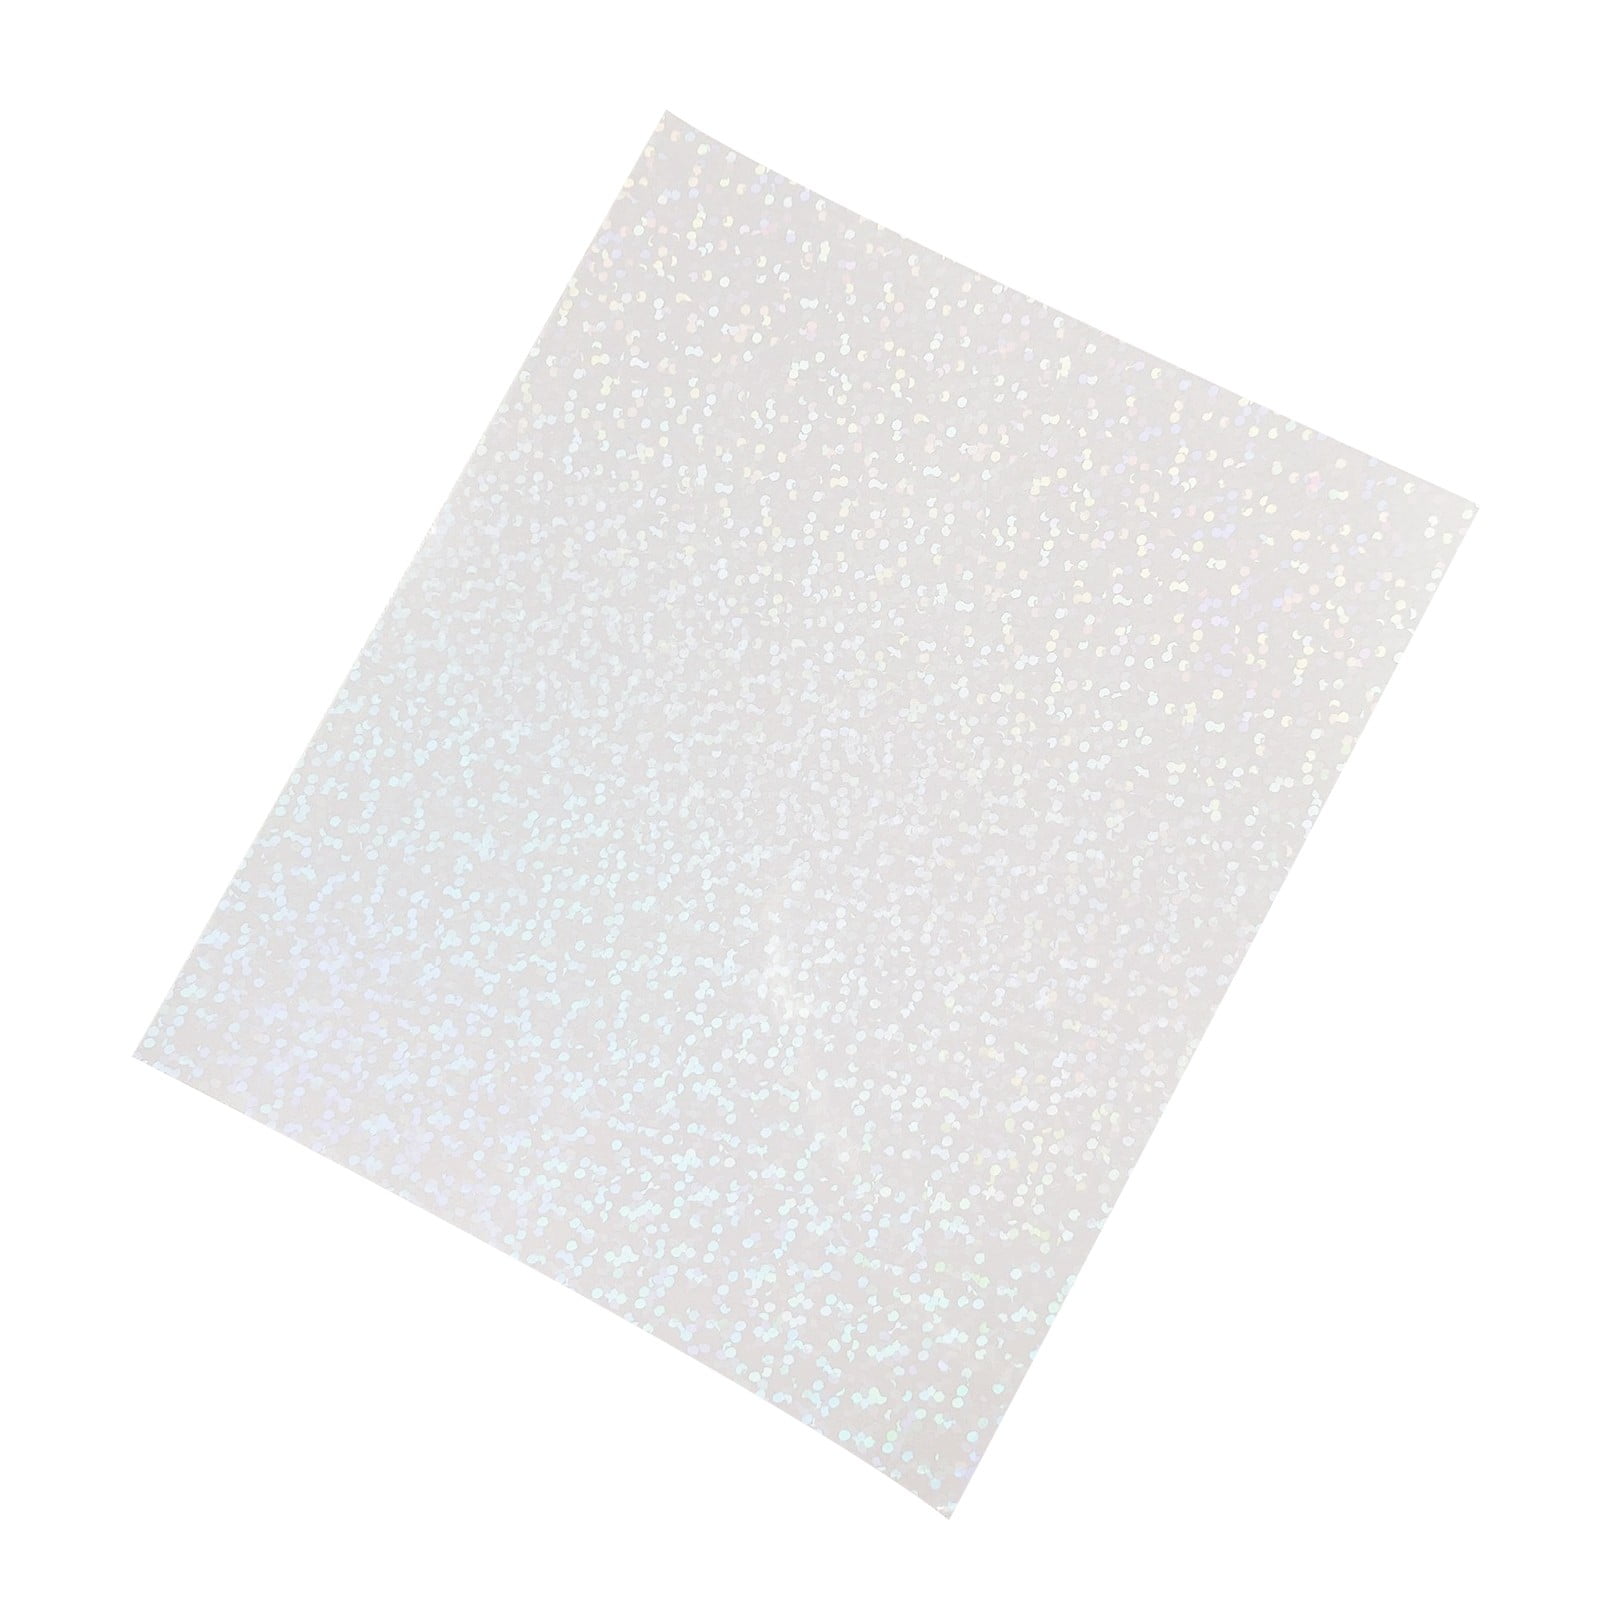 Holographic Sticker Paper 24 Sheets Transparent Holographic Laminate Vinyl Sheets Self Adhesive 8.5x11 Inch Clear Overlay Lamination Sticker Film for Stickers DIY Crafts Dots Patterns 